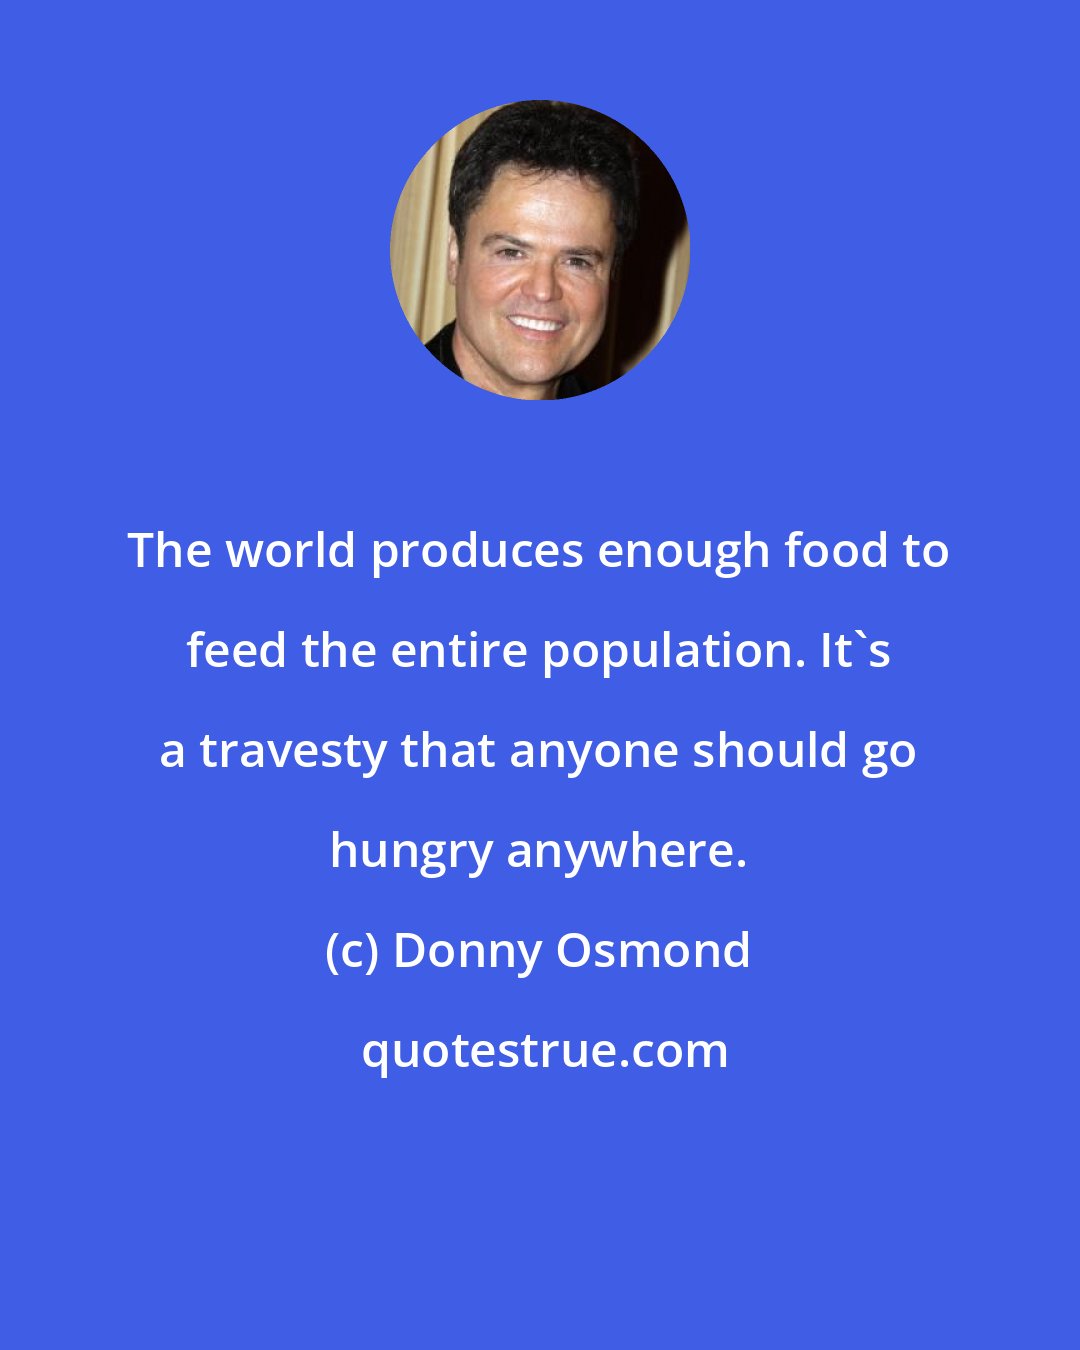 Donny Osmond: The world produces enough food to feed the entire population. It's a travesty that anyone should go hungry anywhere.